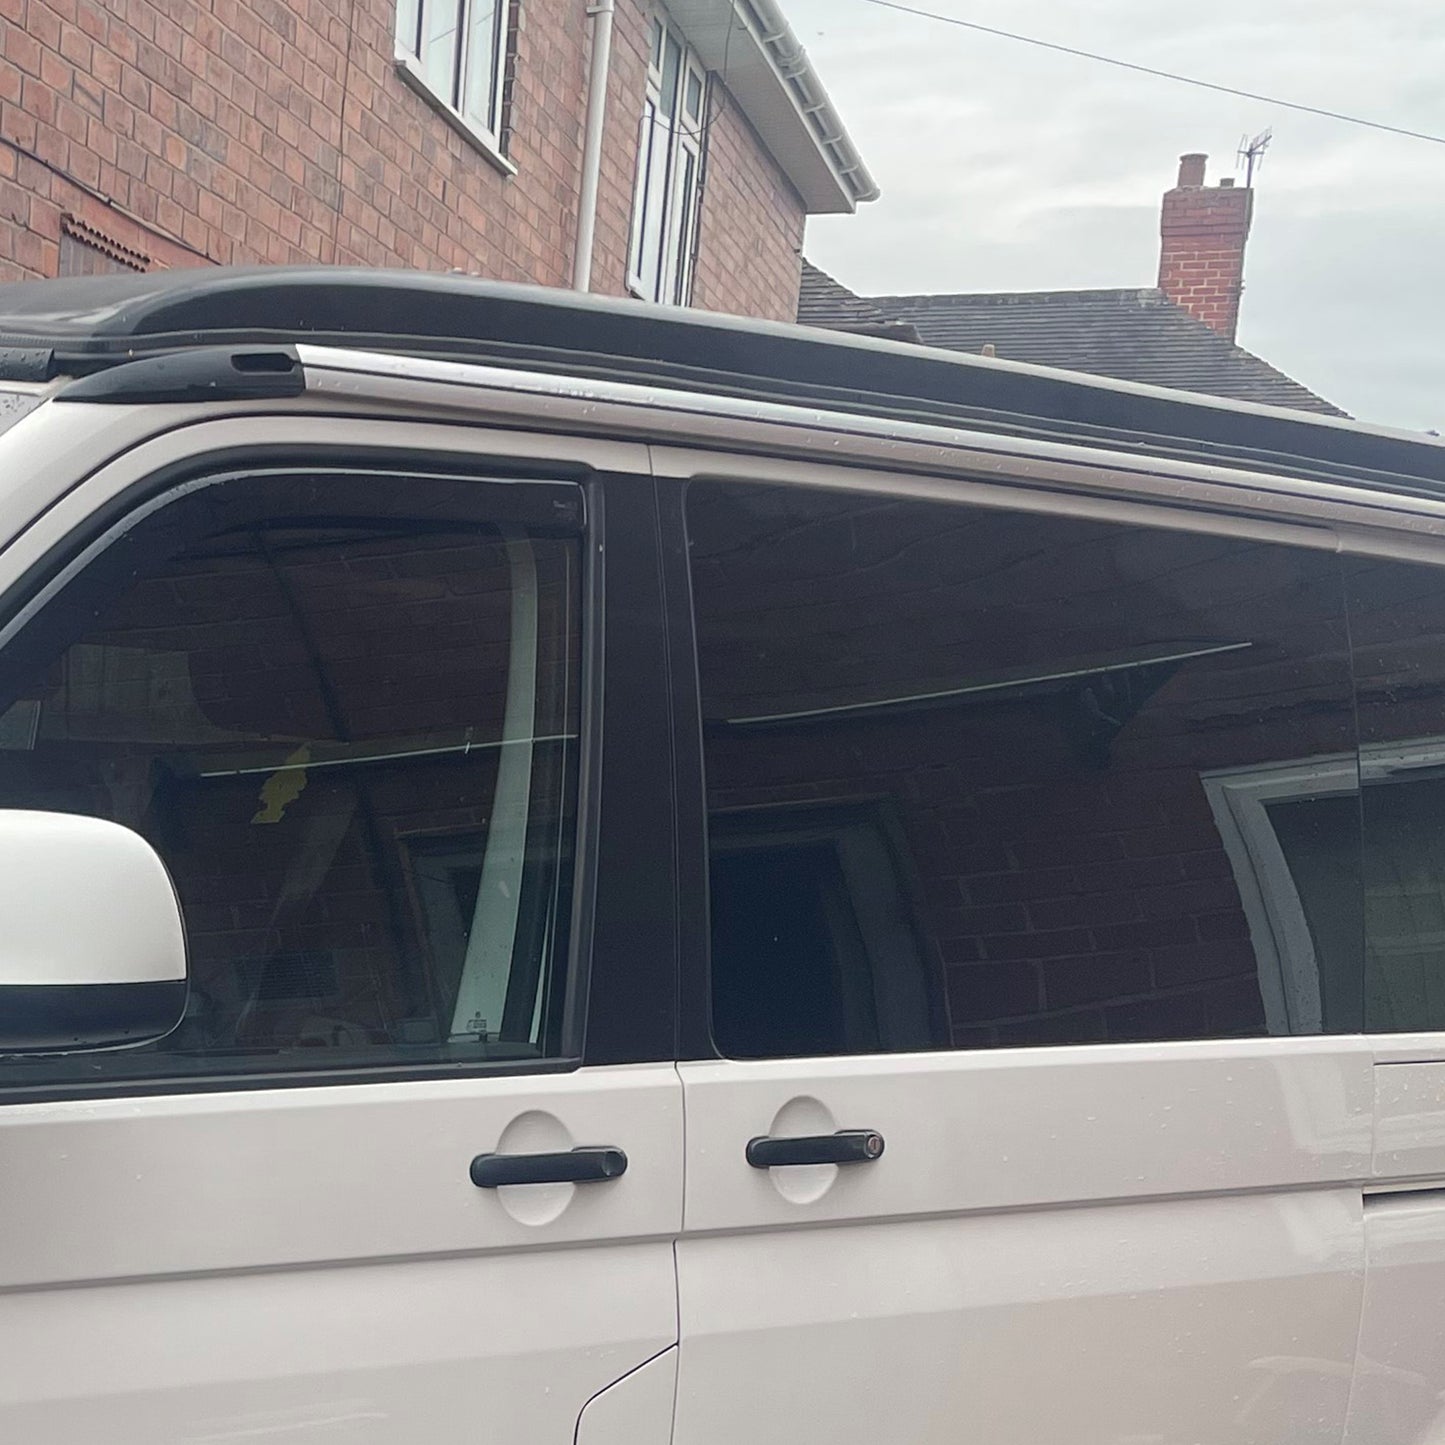 VW T5 Awning Rails (Anodised Silver) Ideal for Campervan Drive-Through Awning, Compatible with Reimo Awning (B-Grade)